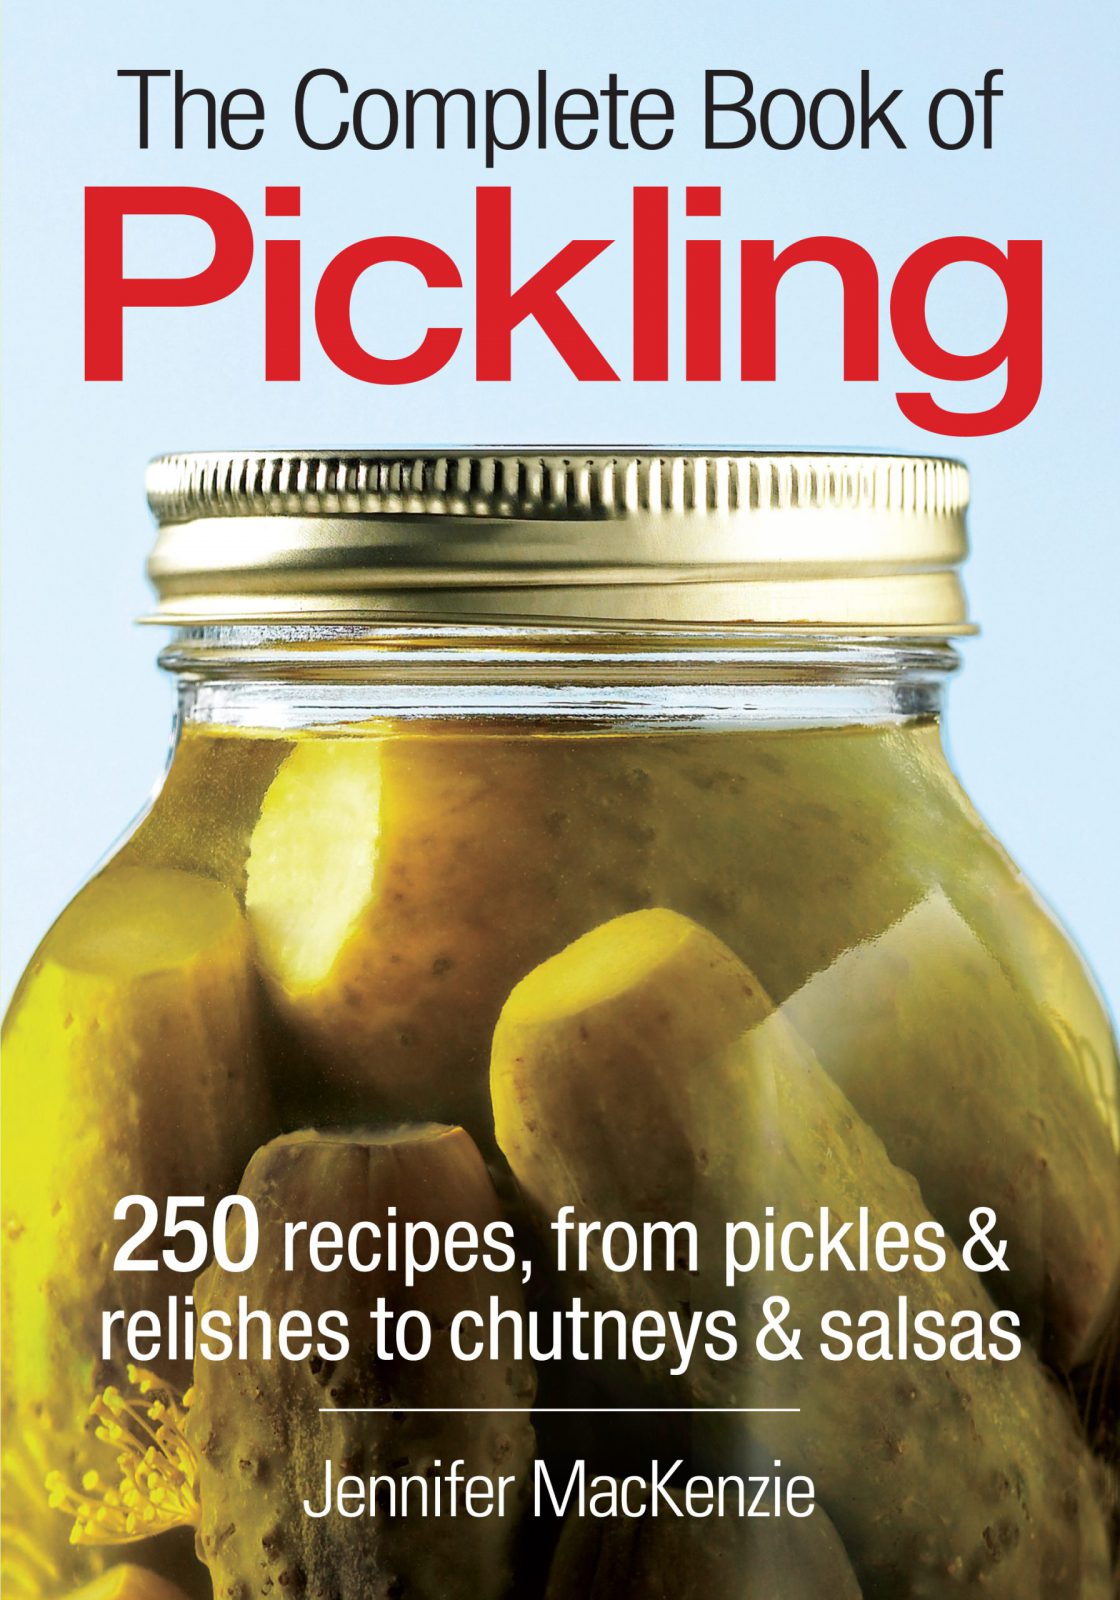 The Complete Book of Pickling